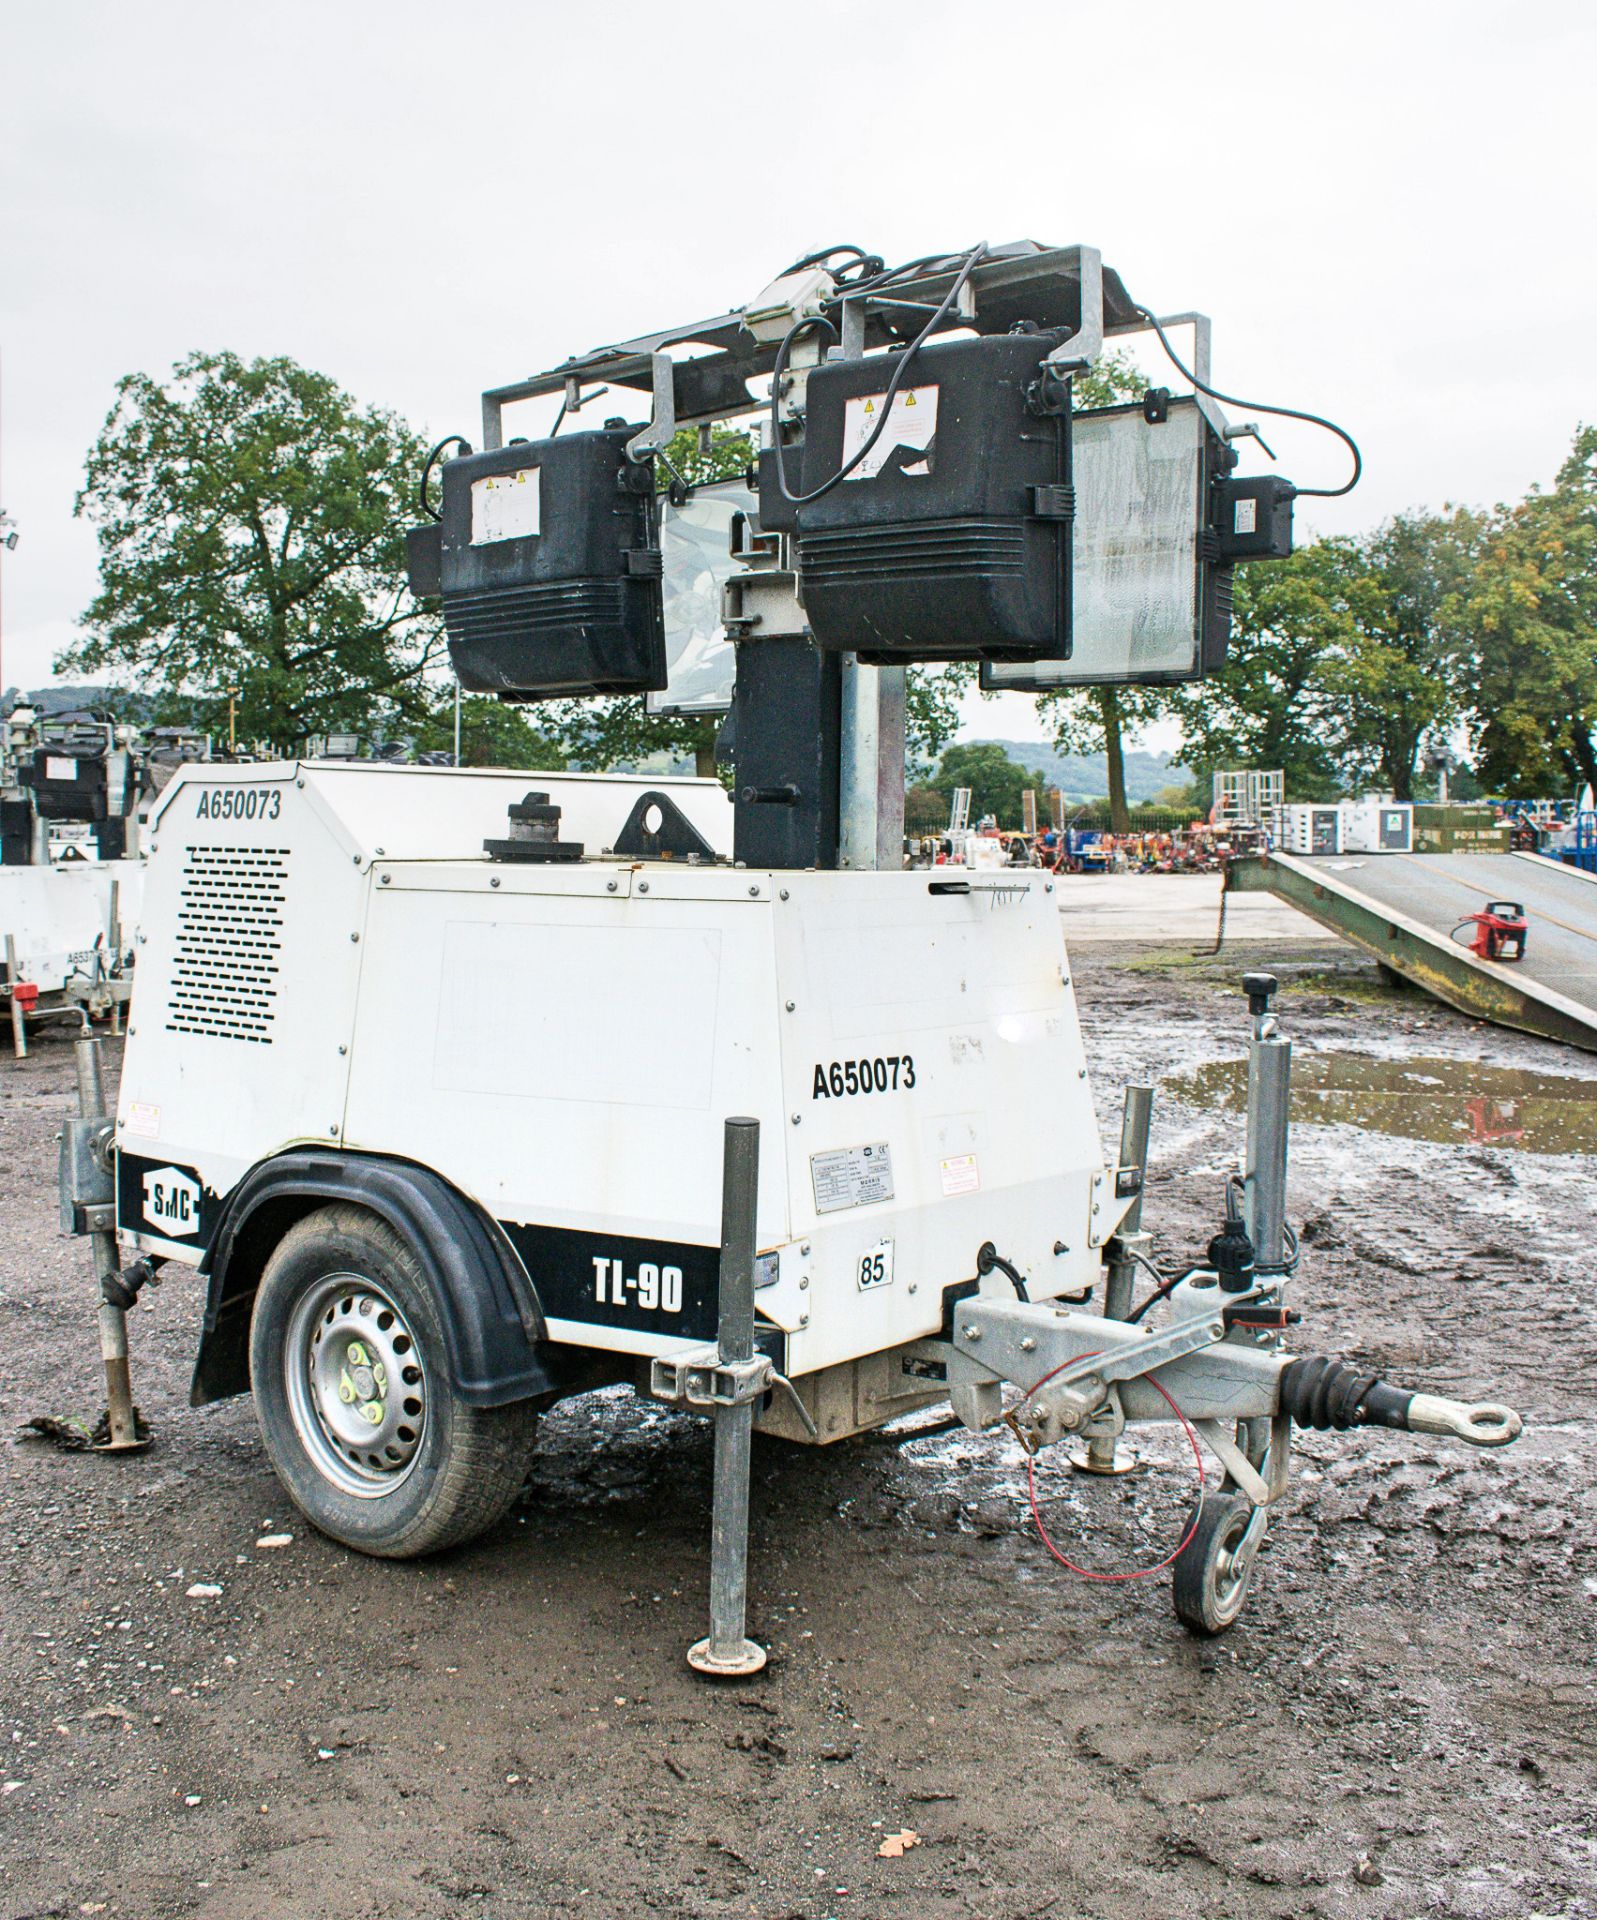 SMC TL-90 diesel driven mobile lighting tower Year: 2014 S/N: 1410660 Recorded Hours: 7195